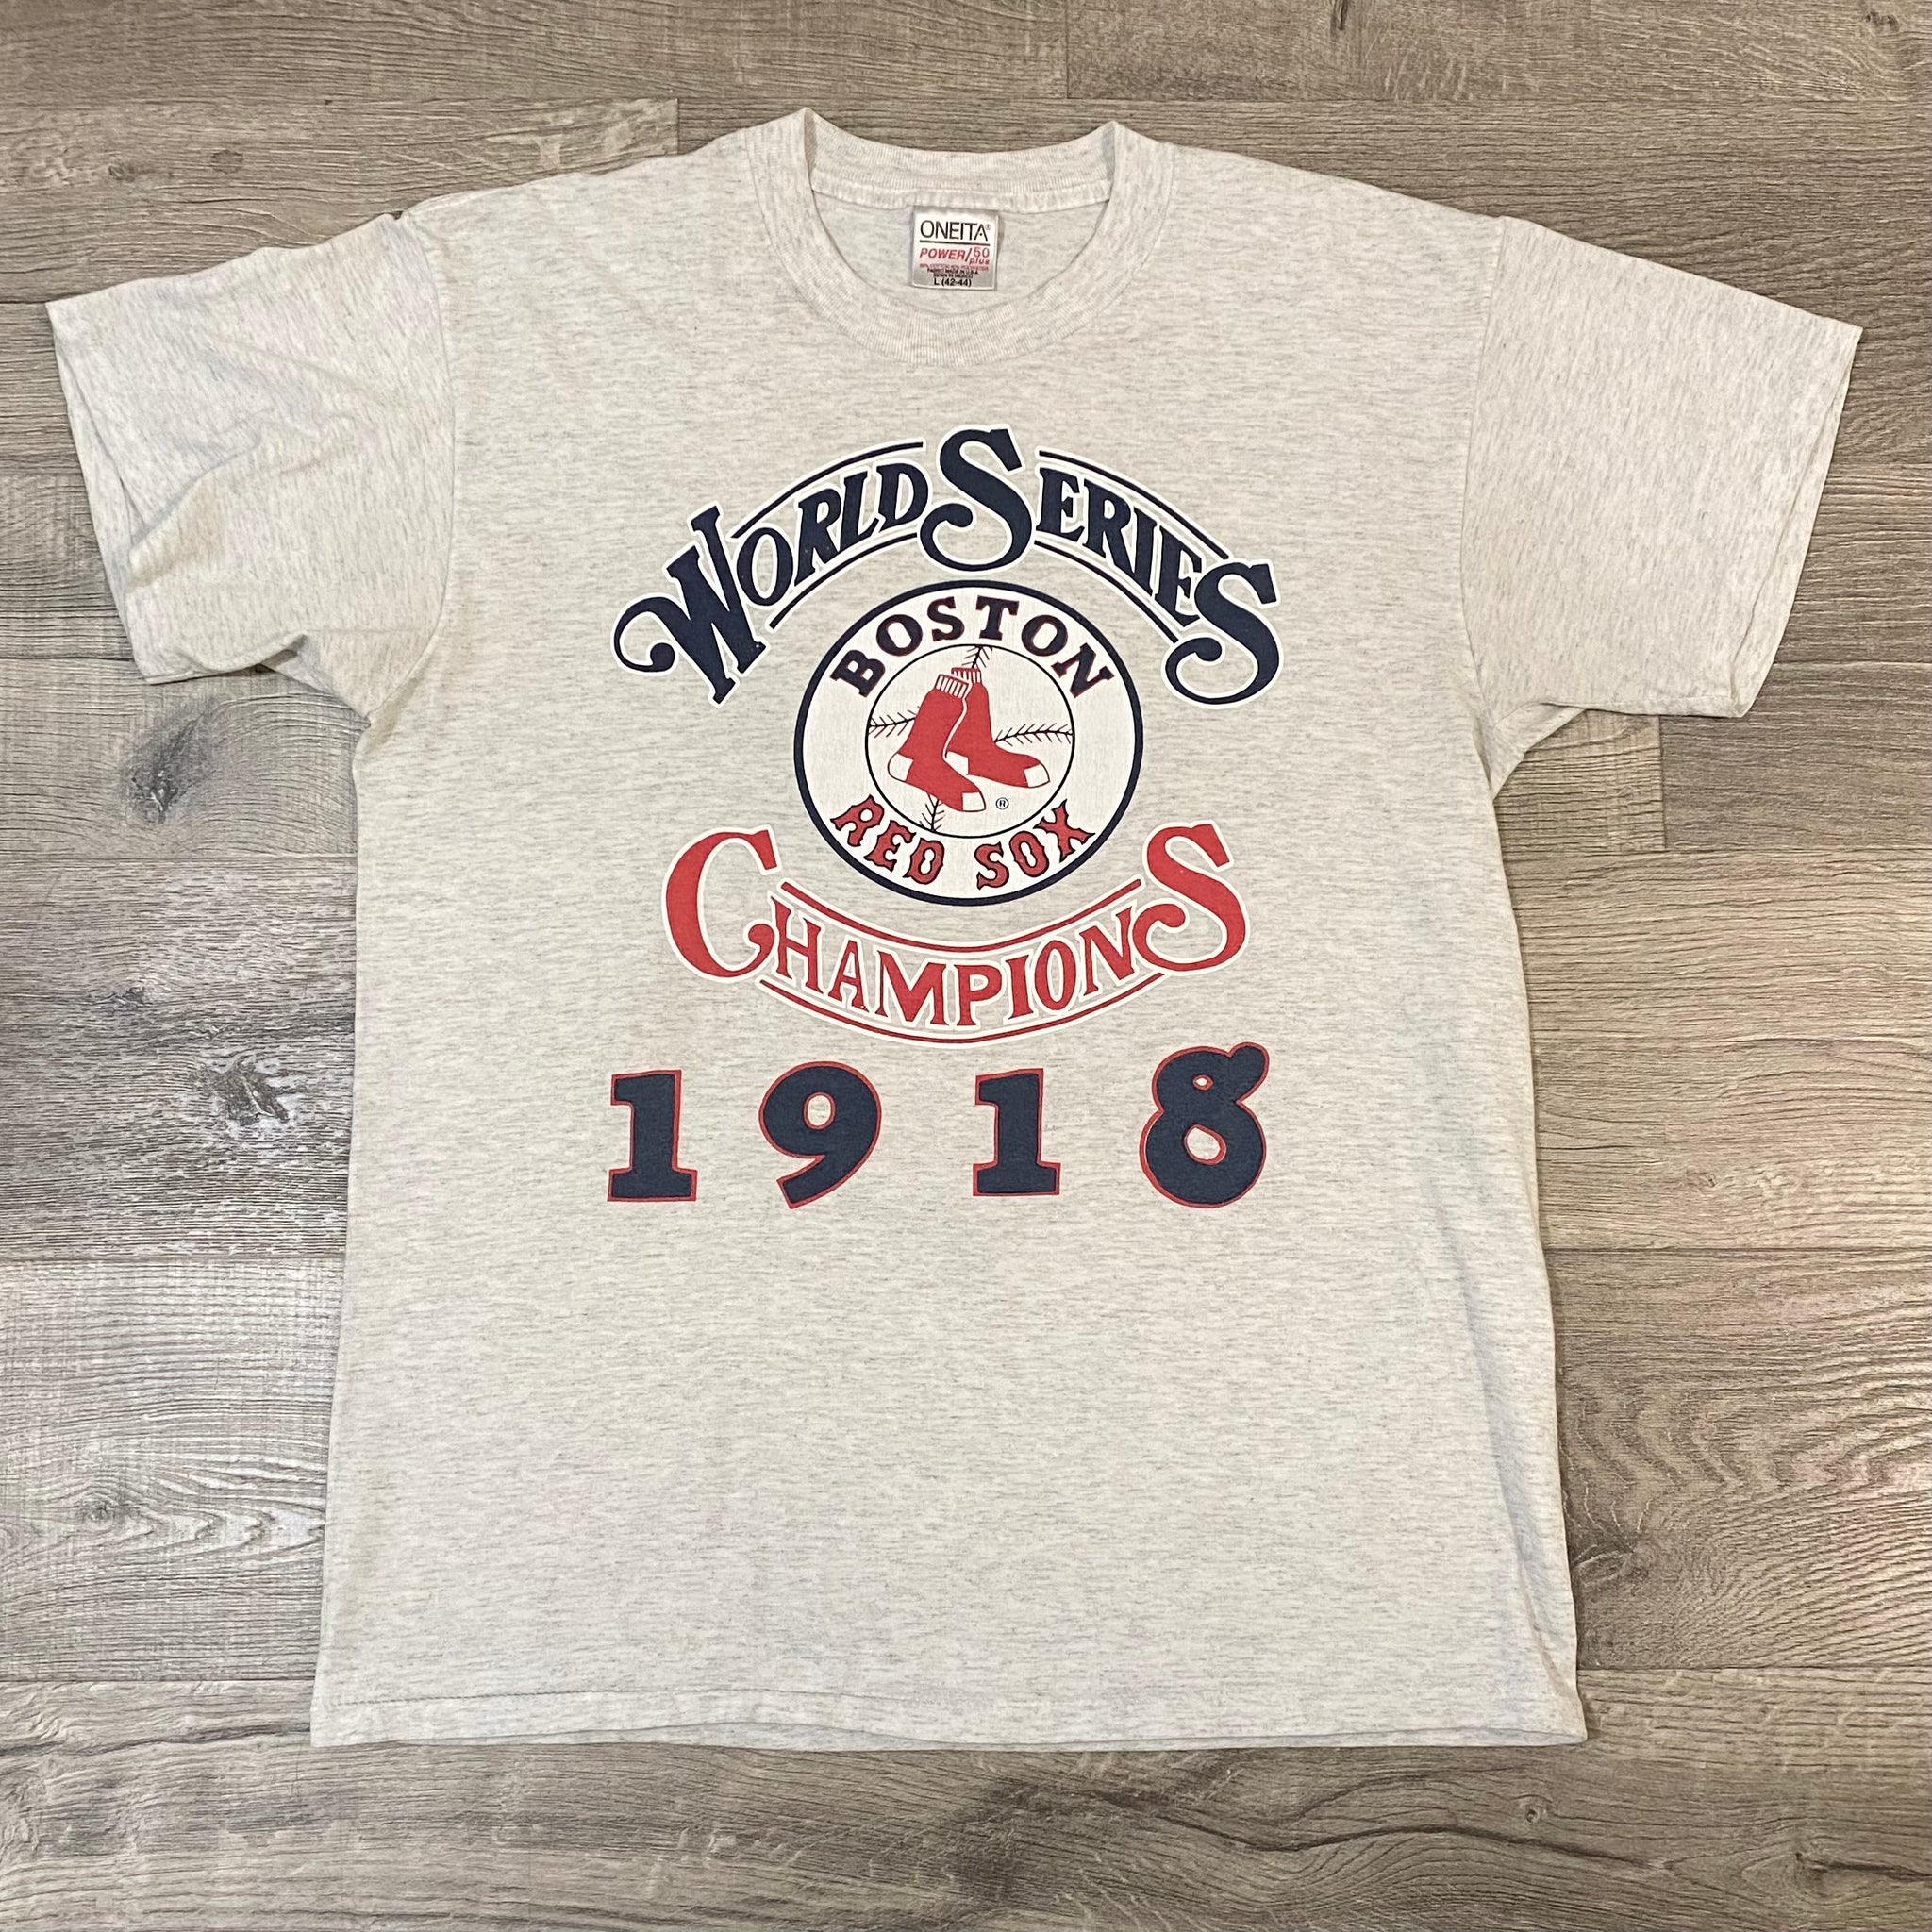 BOSTON RED SOX VINTAGE 1990'S FENWAY PARK T-SHIRT YOUTH LARGE